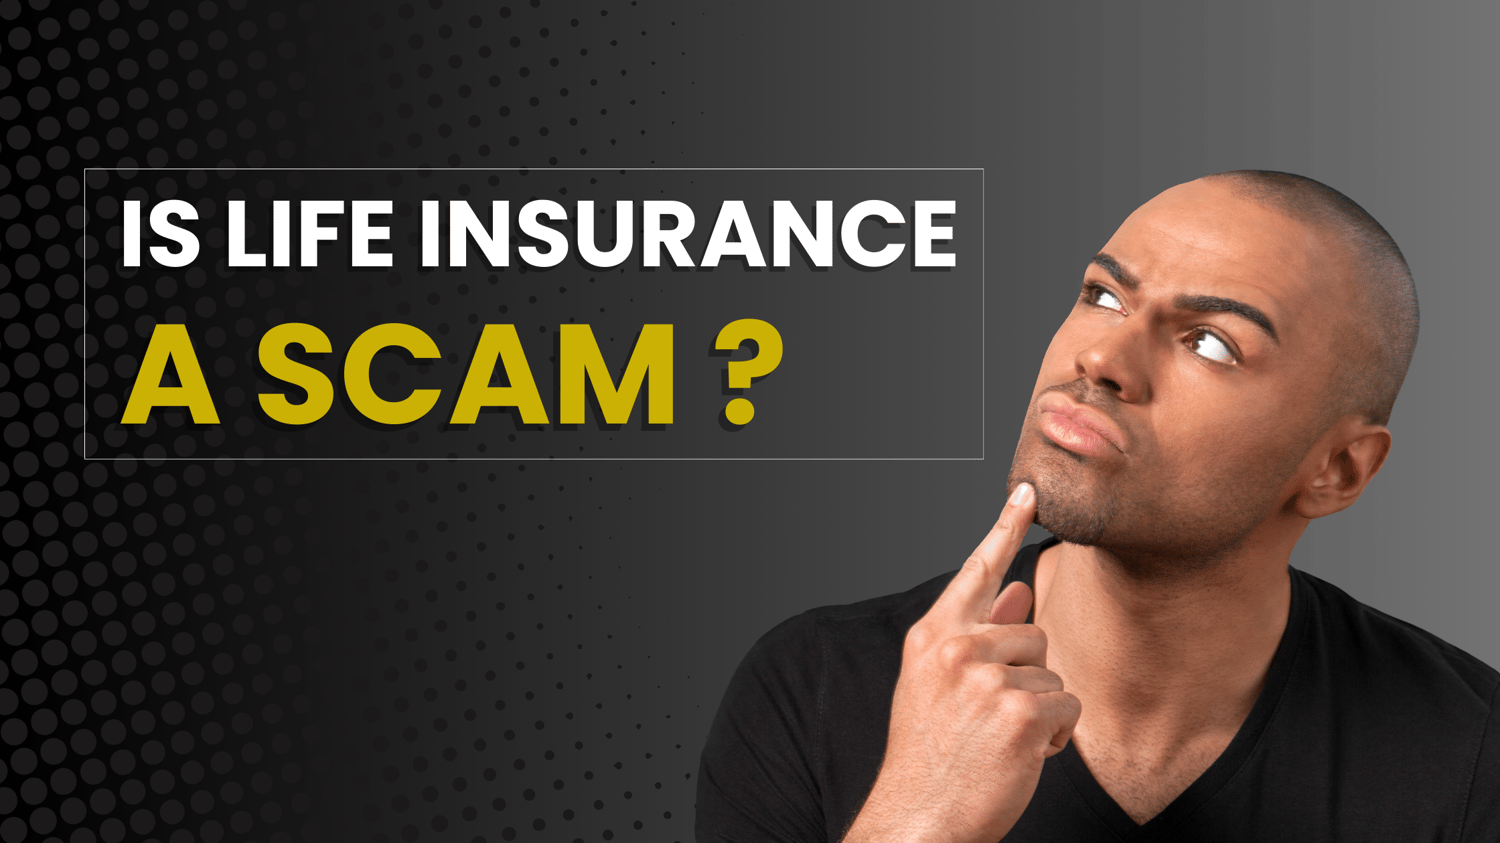 IS LIFE INSURANCE A SCAM?